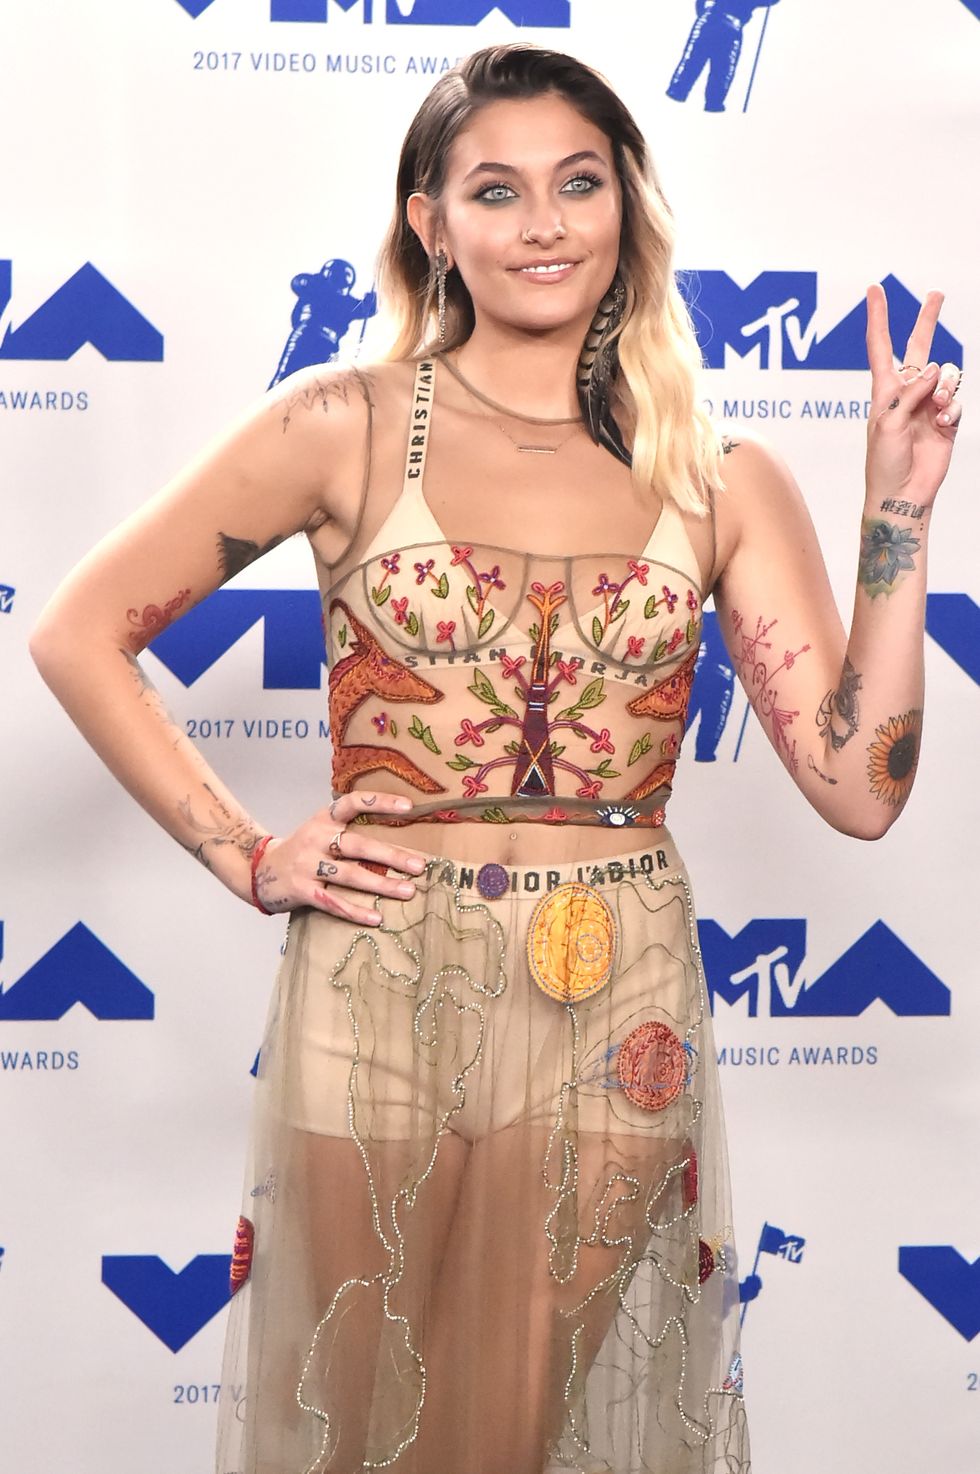 INGLEWOOD, CA - AUGUST 27:  Paris Jackson poses in the press room during the 2017 MTV Video Music Awards at The Forum on August 27, 2017 in Inglewood, California.  (Photo by David Crotty/Patrick McMullan via Getty Images)